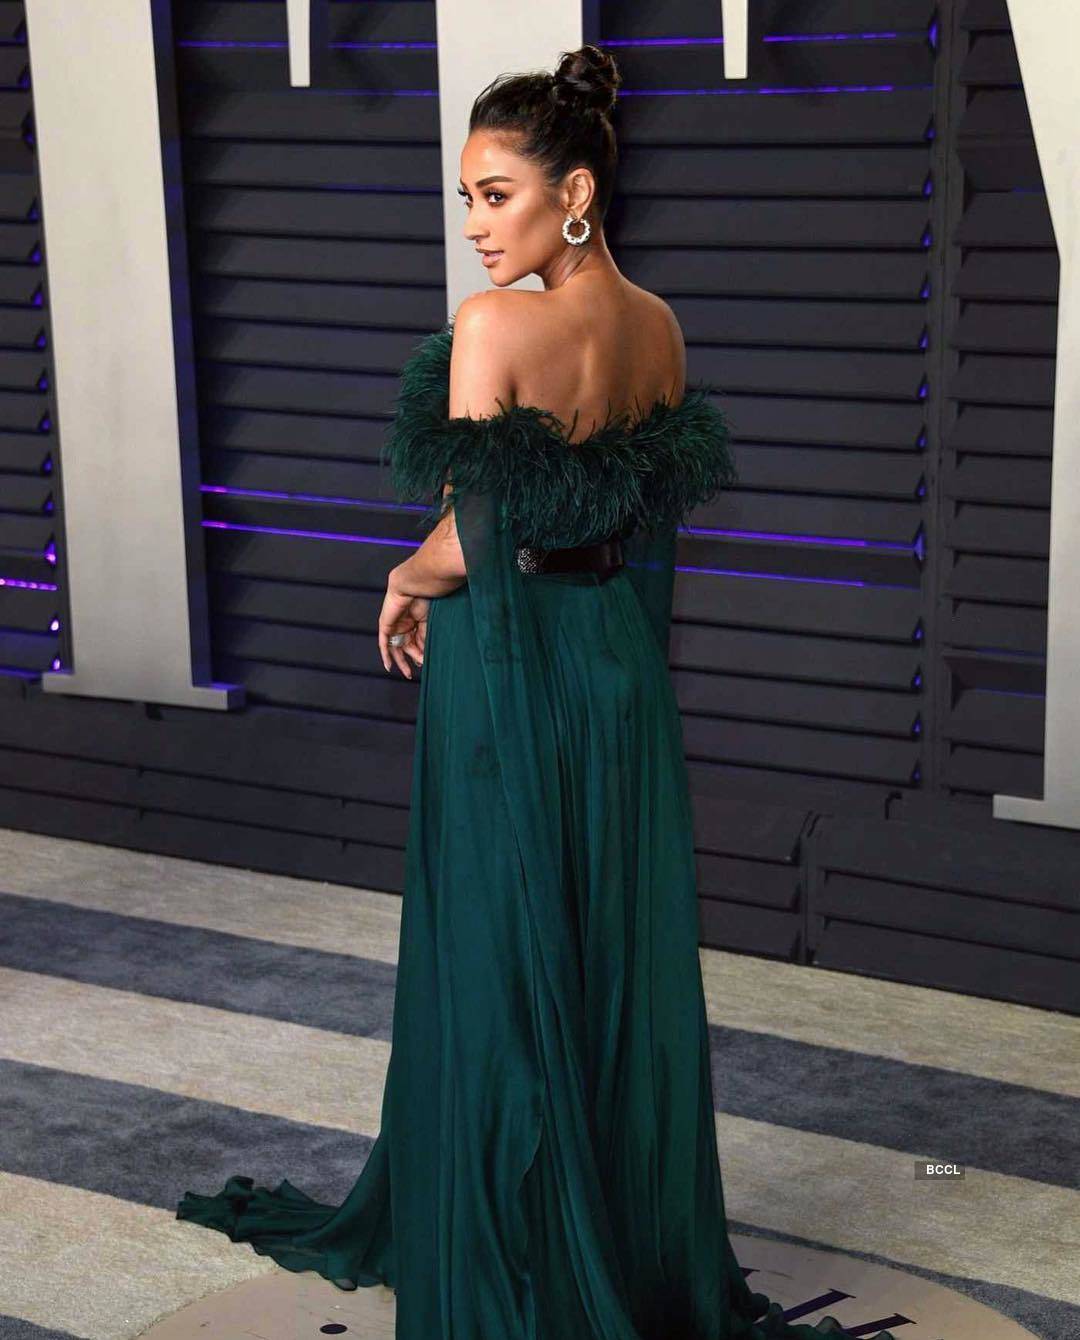 Bold and beautiful pictures of fashionista Shay Mitchell